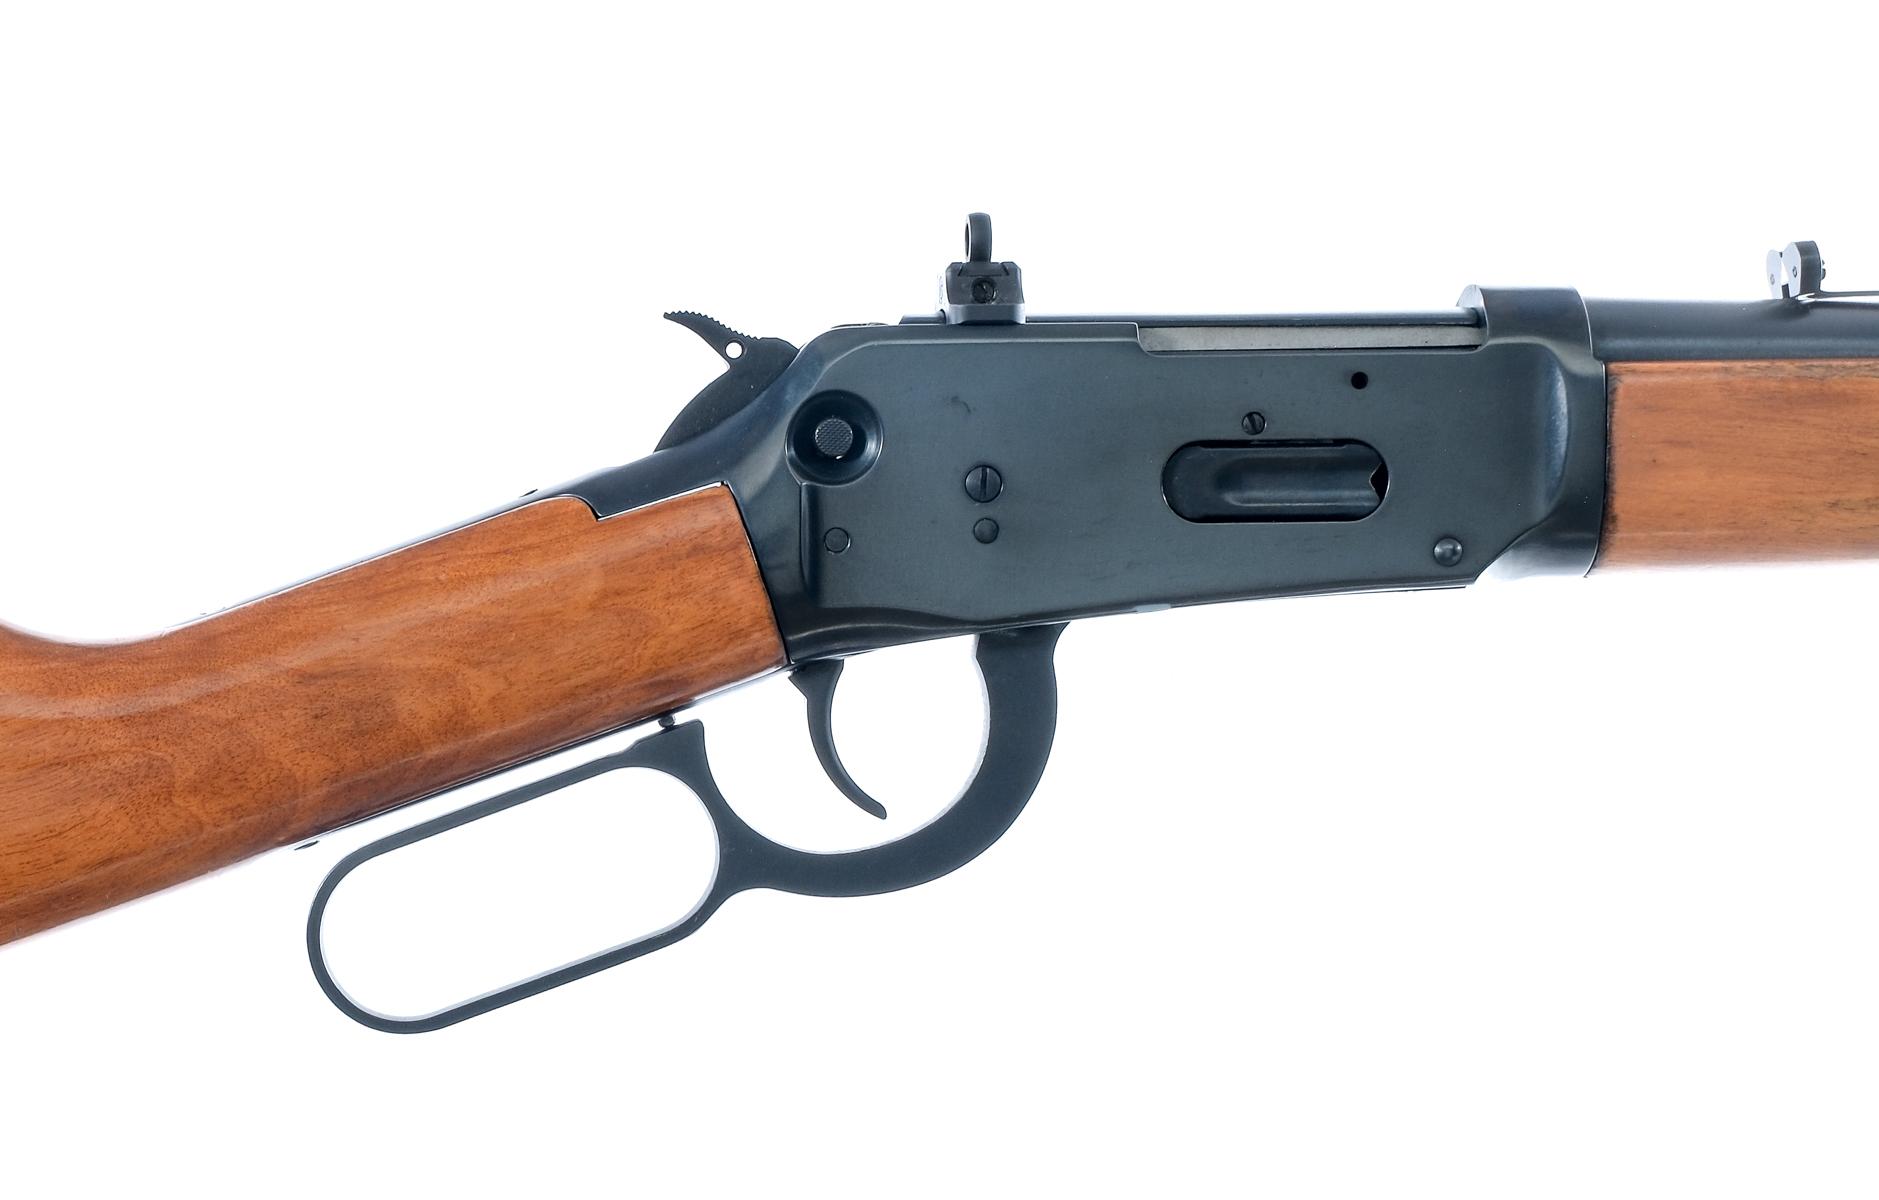 Winchester 94 AE .357 Mag Lever Action Rifle 16"